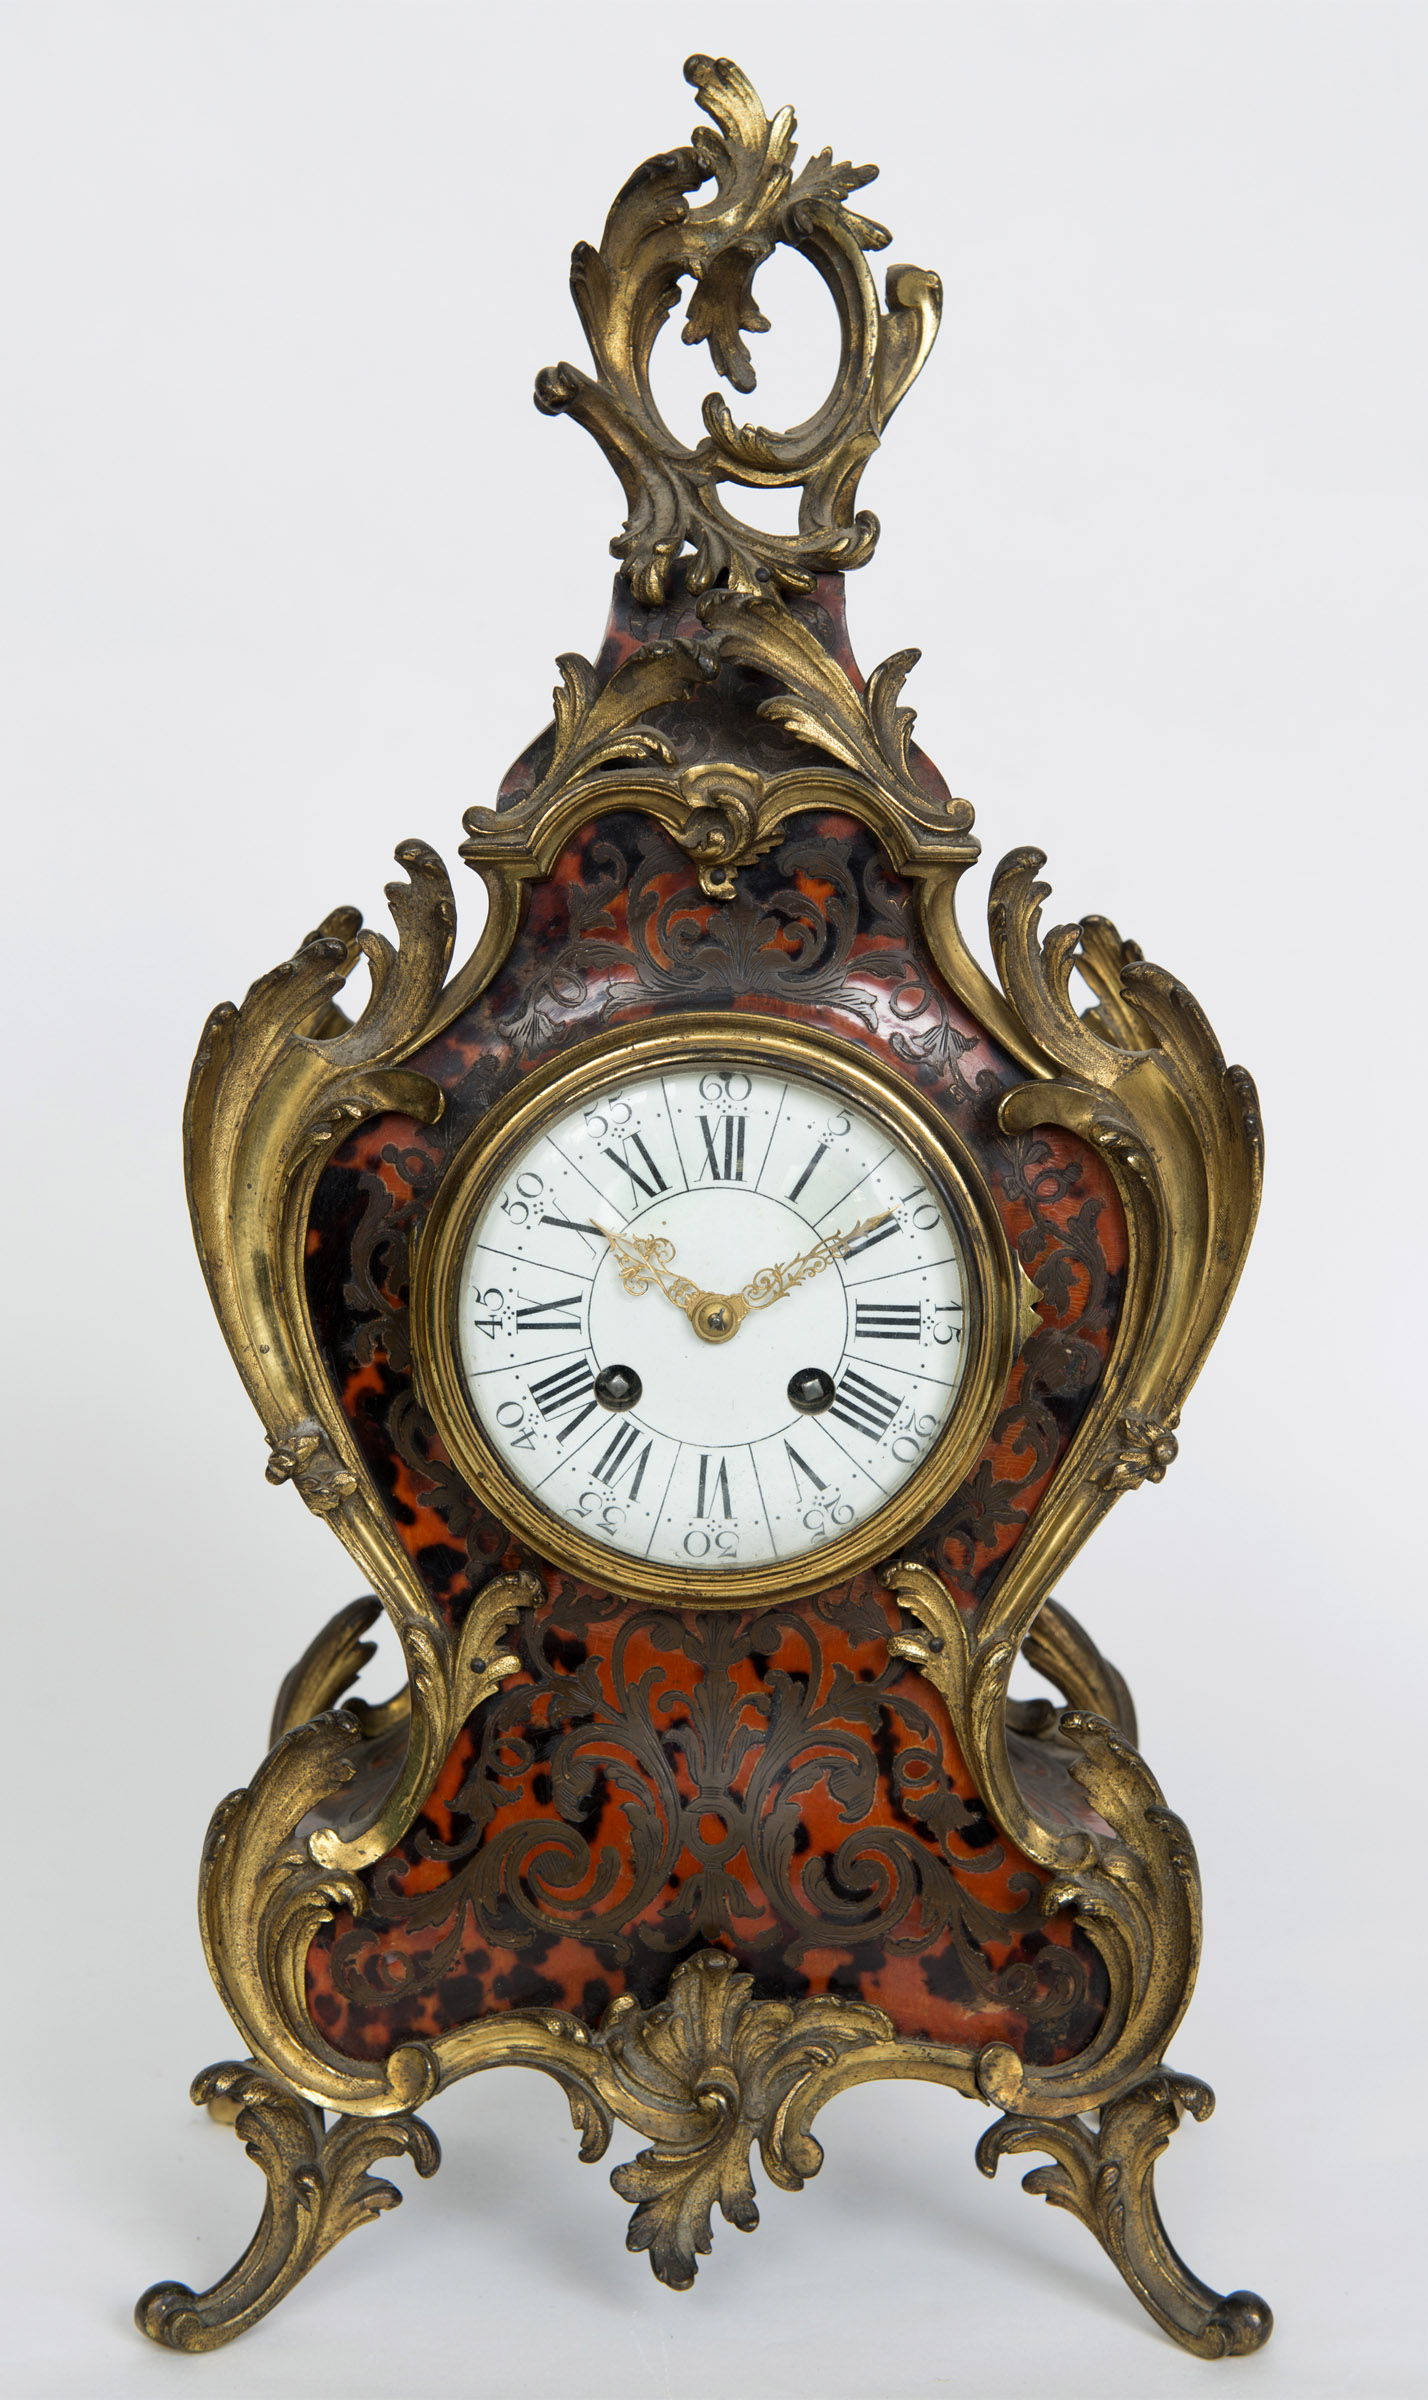 A LOUIS XV STYLE BOULLE MANTEL CLOCK 4" enamel dial on a brass movement stamped Ettienne Maxant